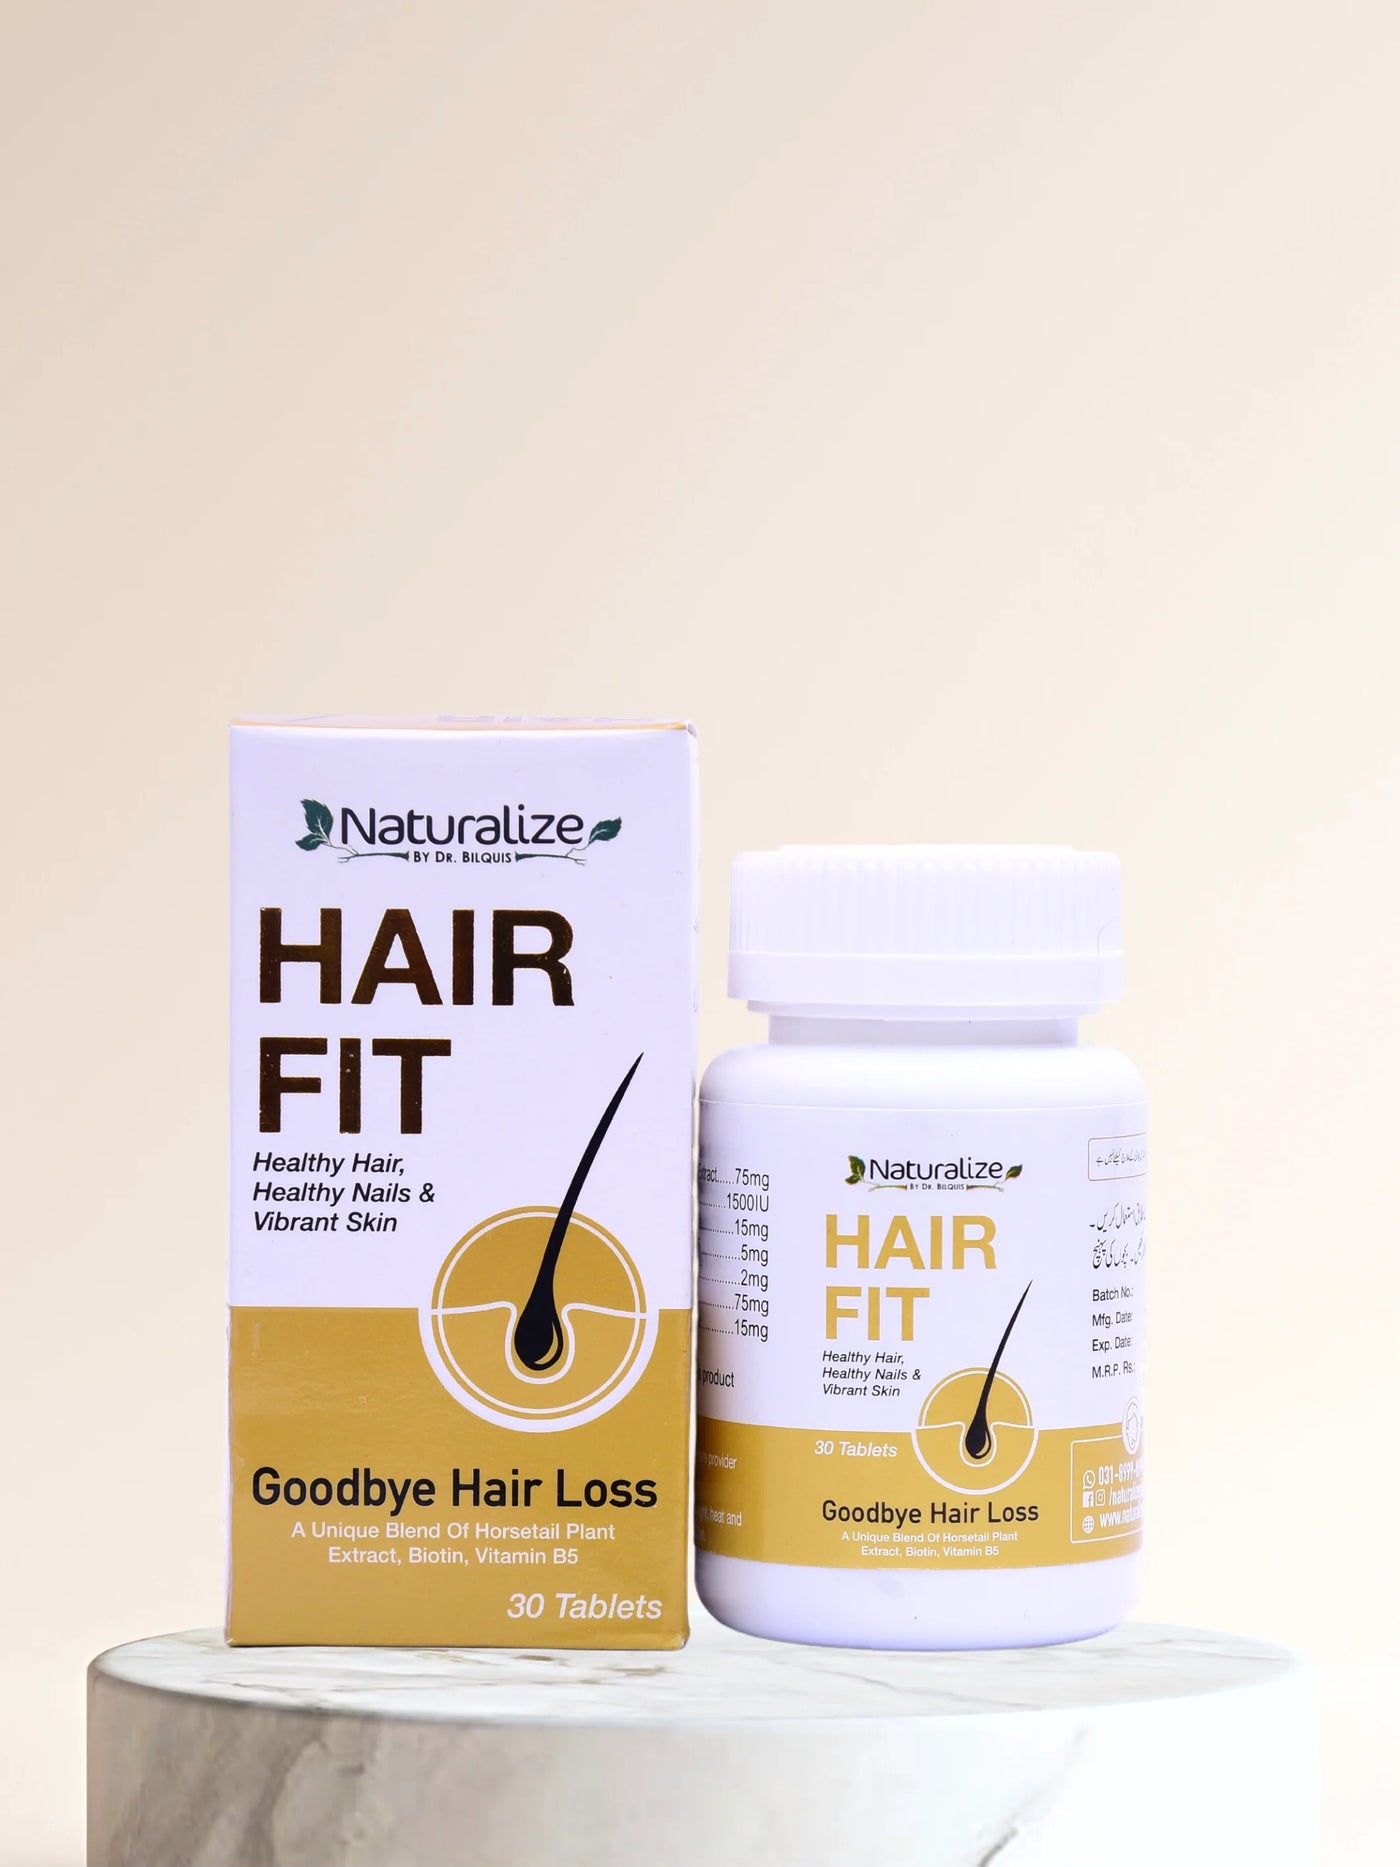 HAIR FIT TABLETS - Healthly Hair, Nails & Vibrant Skin By Dr Bilquis Sheikh